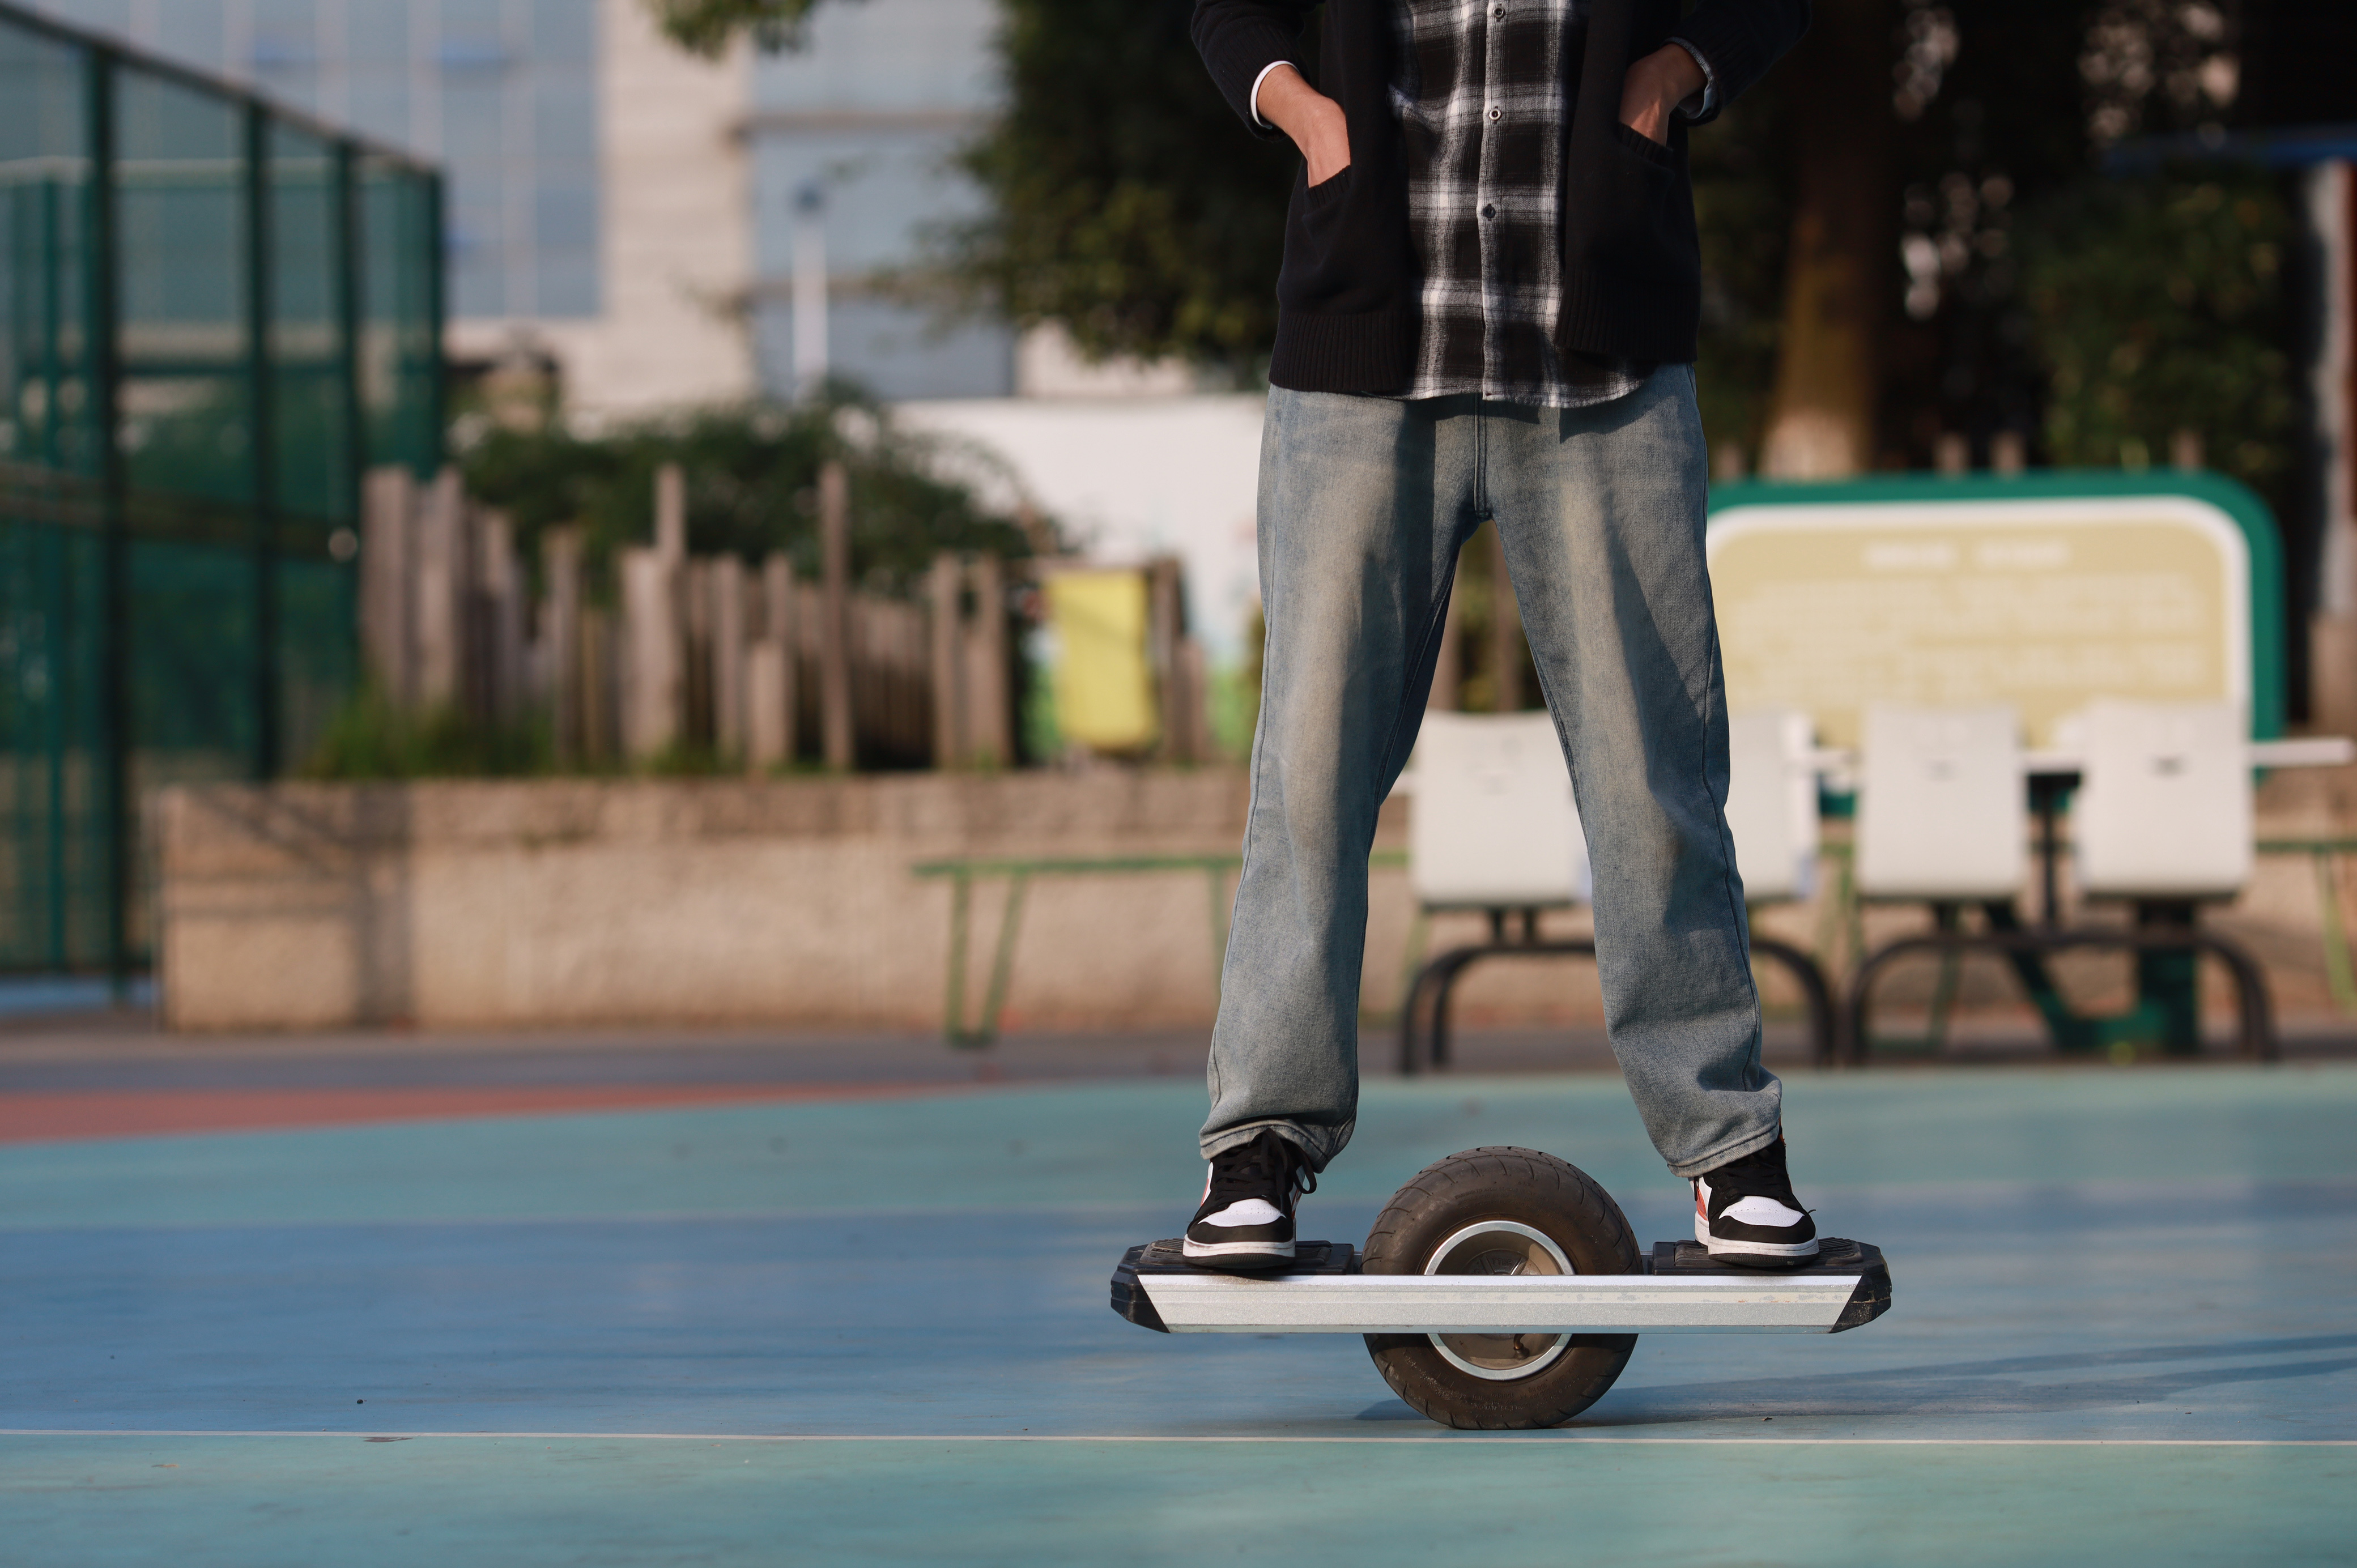 MAGWheel: Trying out the one-wheeled future of transport